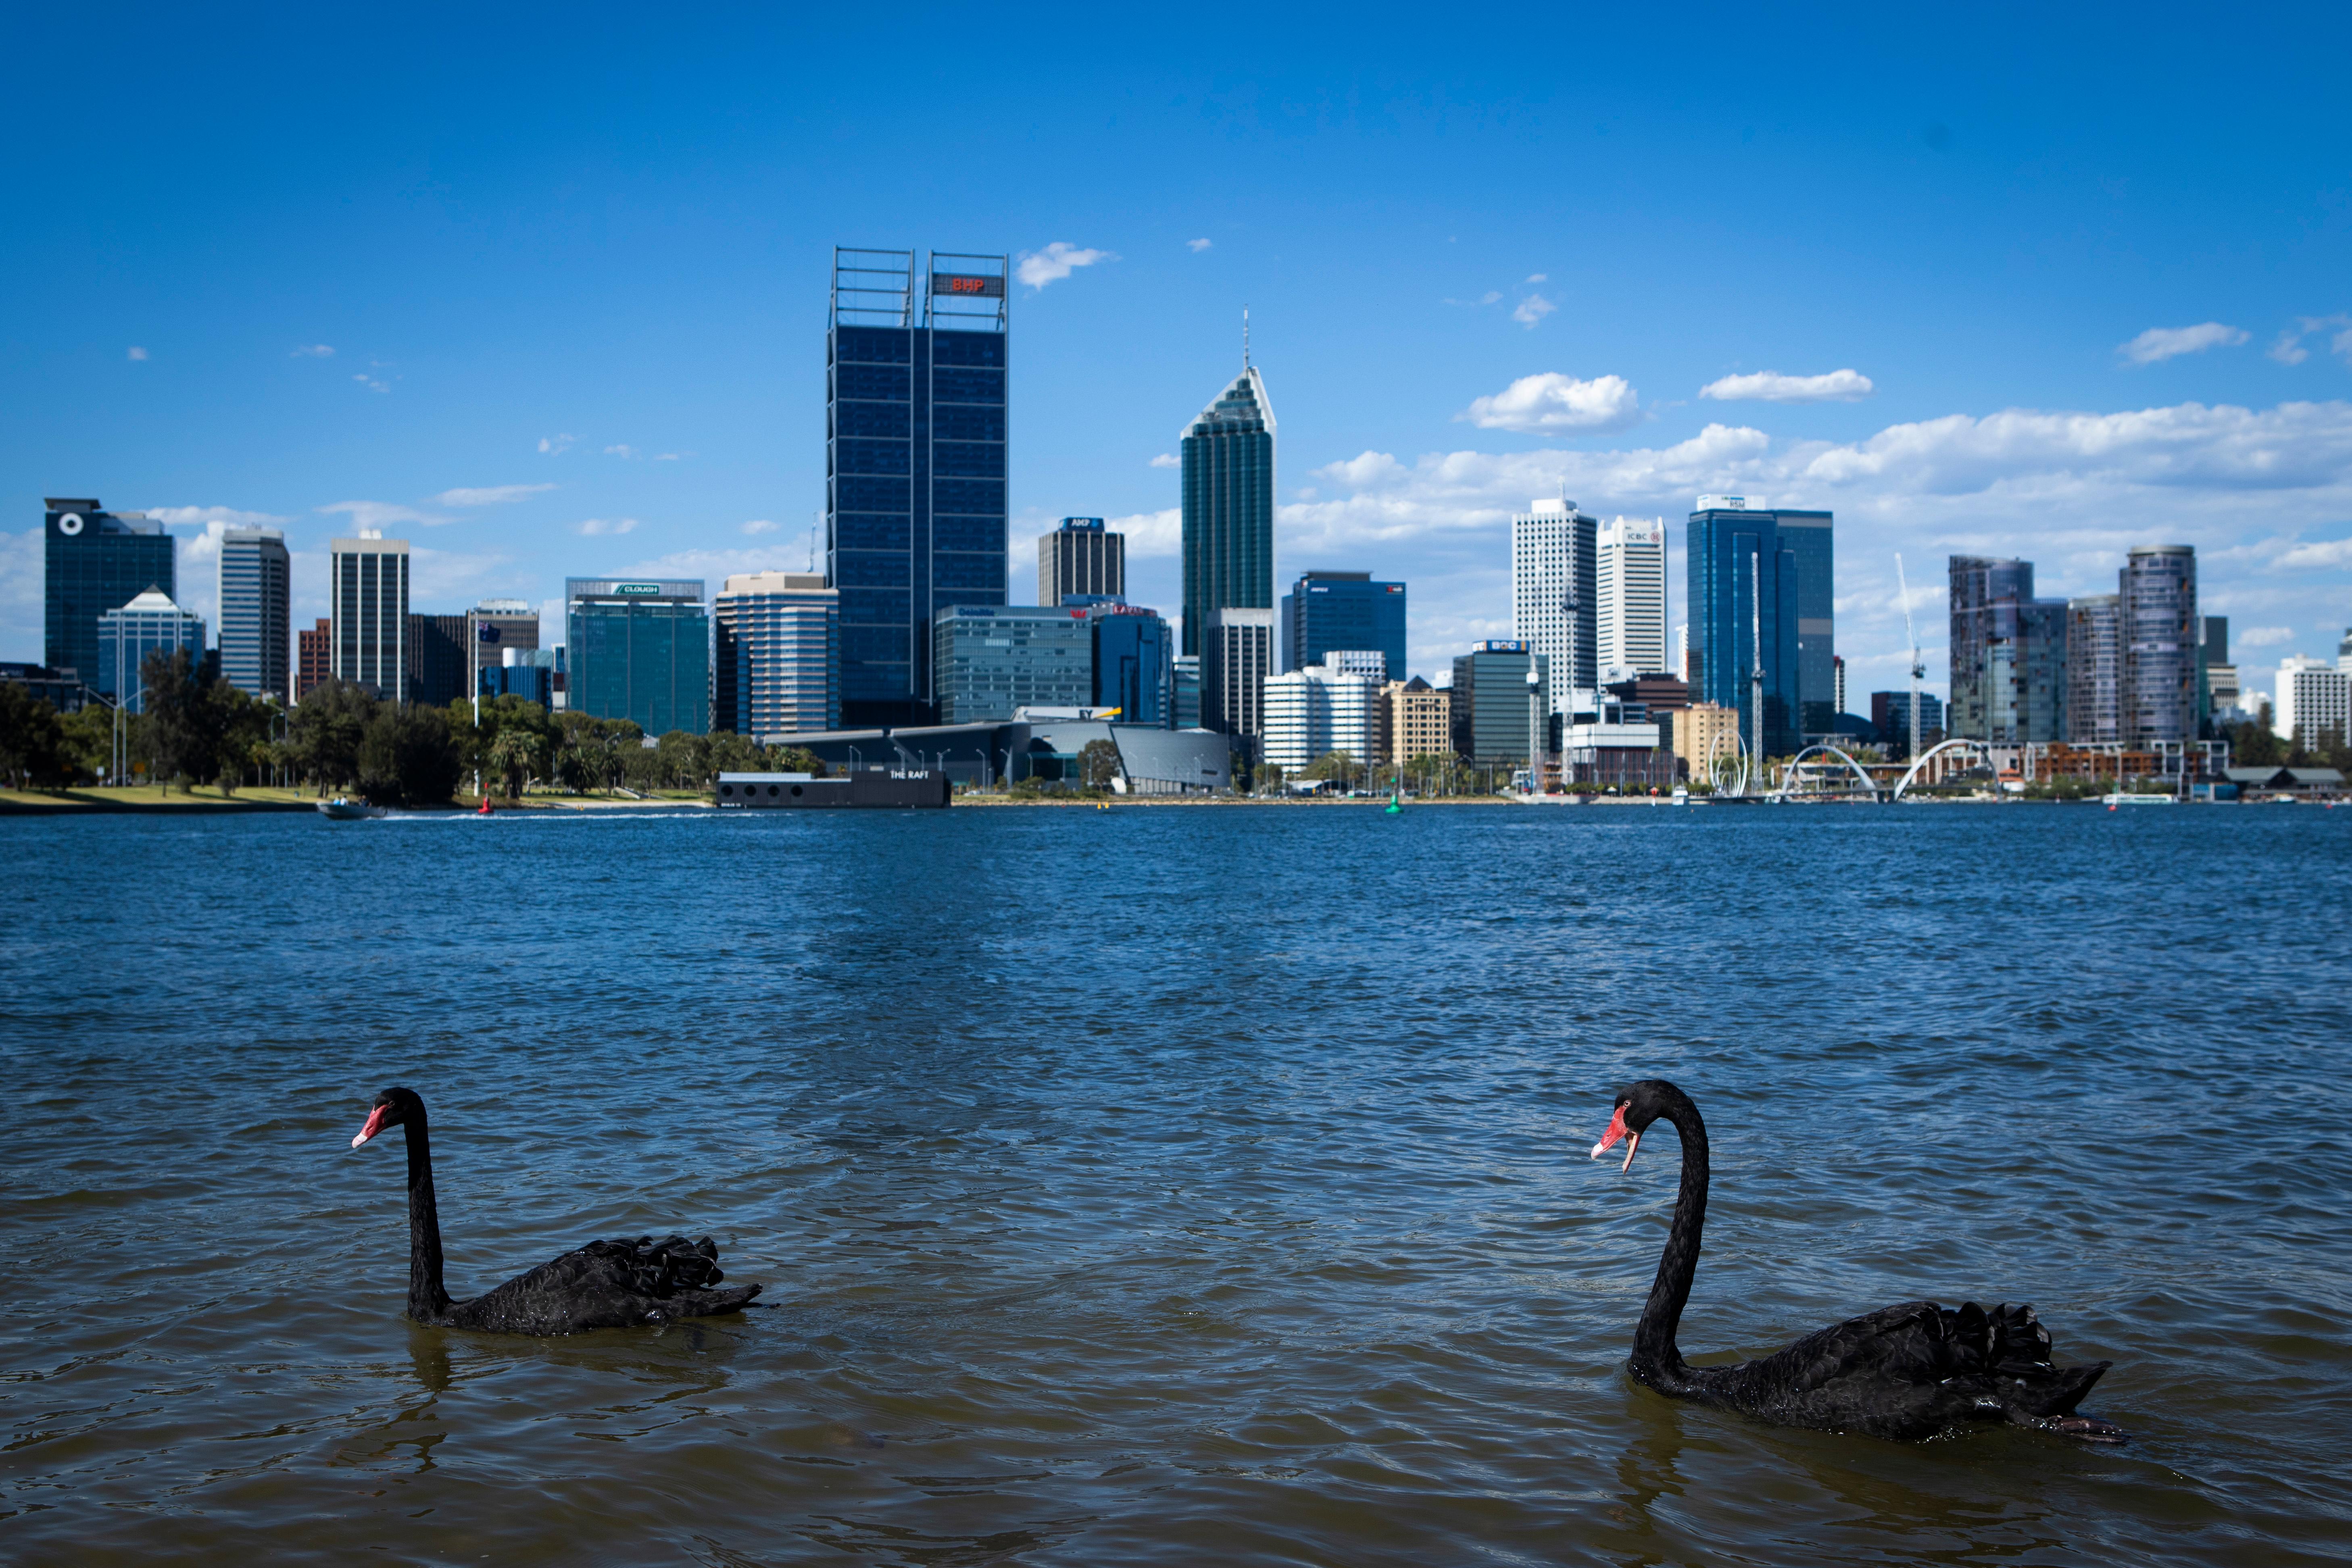 Black swans swimming by a city